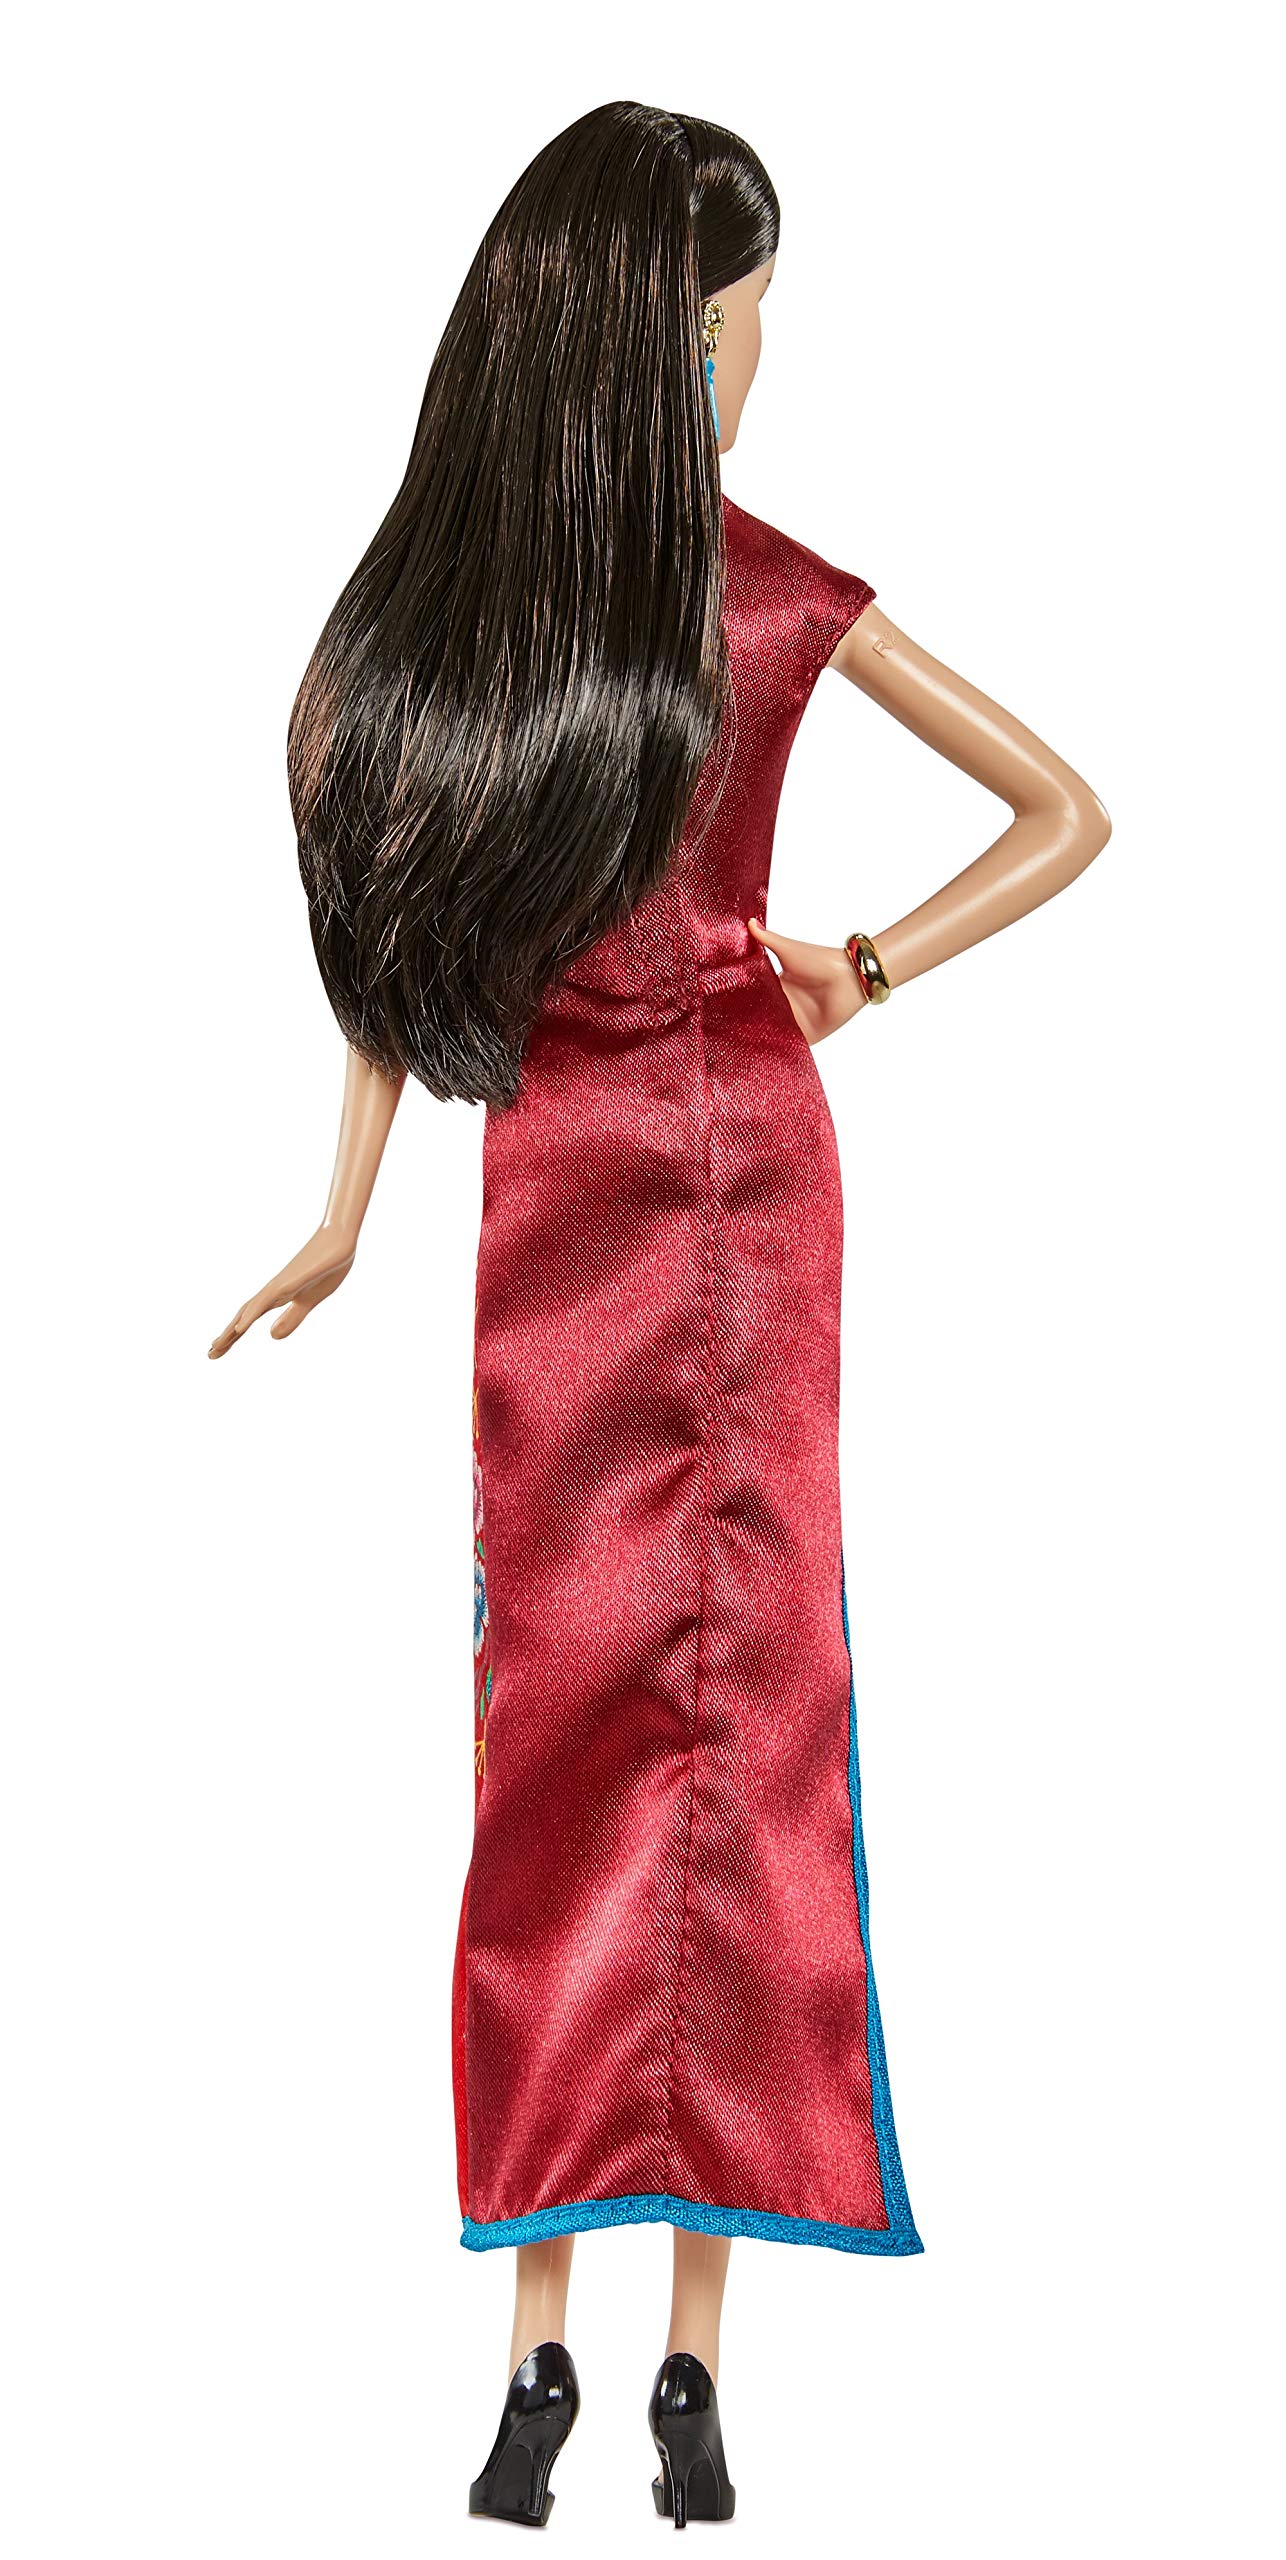 Barbie Signature Lunar New Year Doll (12-inch Brunette) Wearing Red Satin Cheongsam Dress with Accessories, Collectible Gift for Kids & Collectors